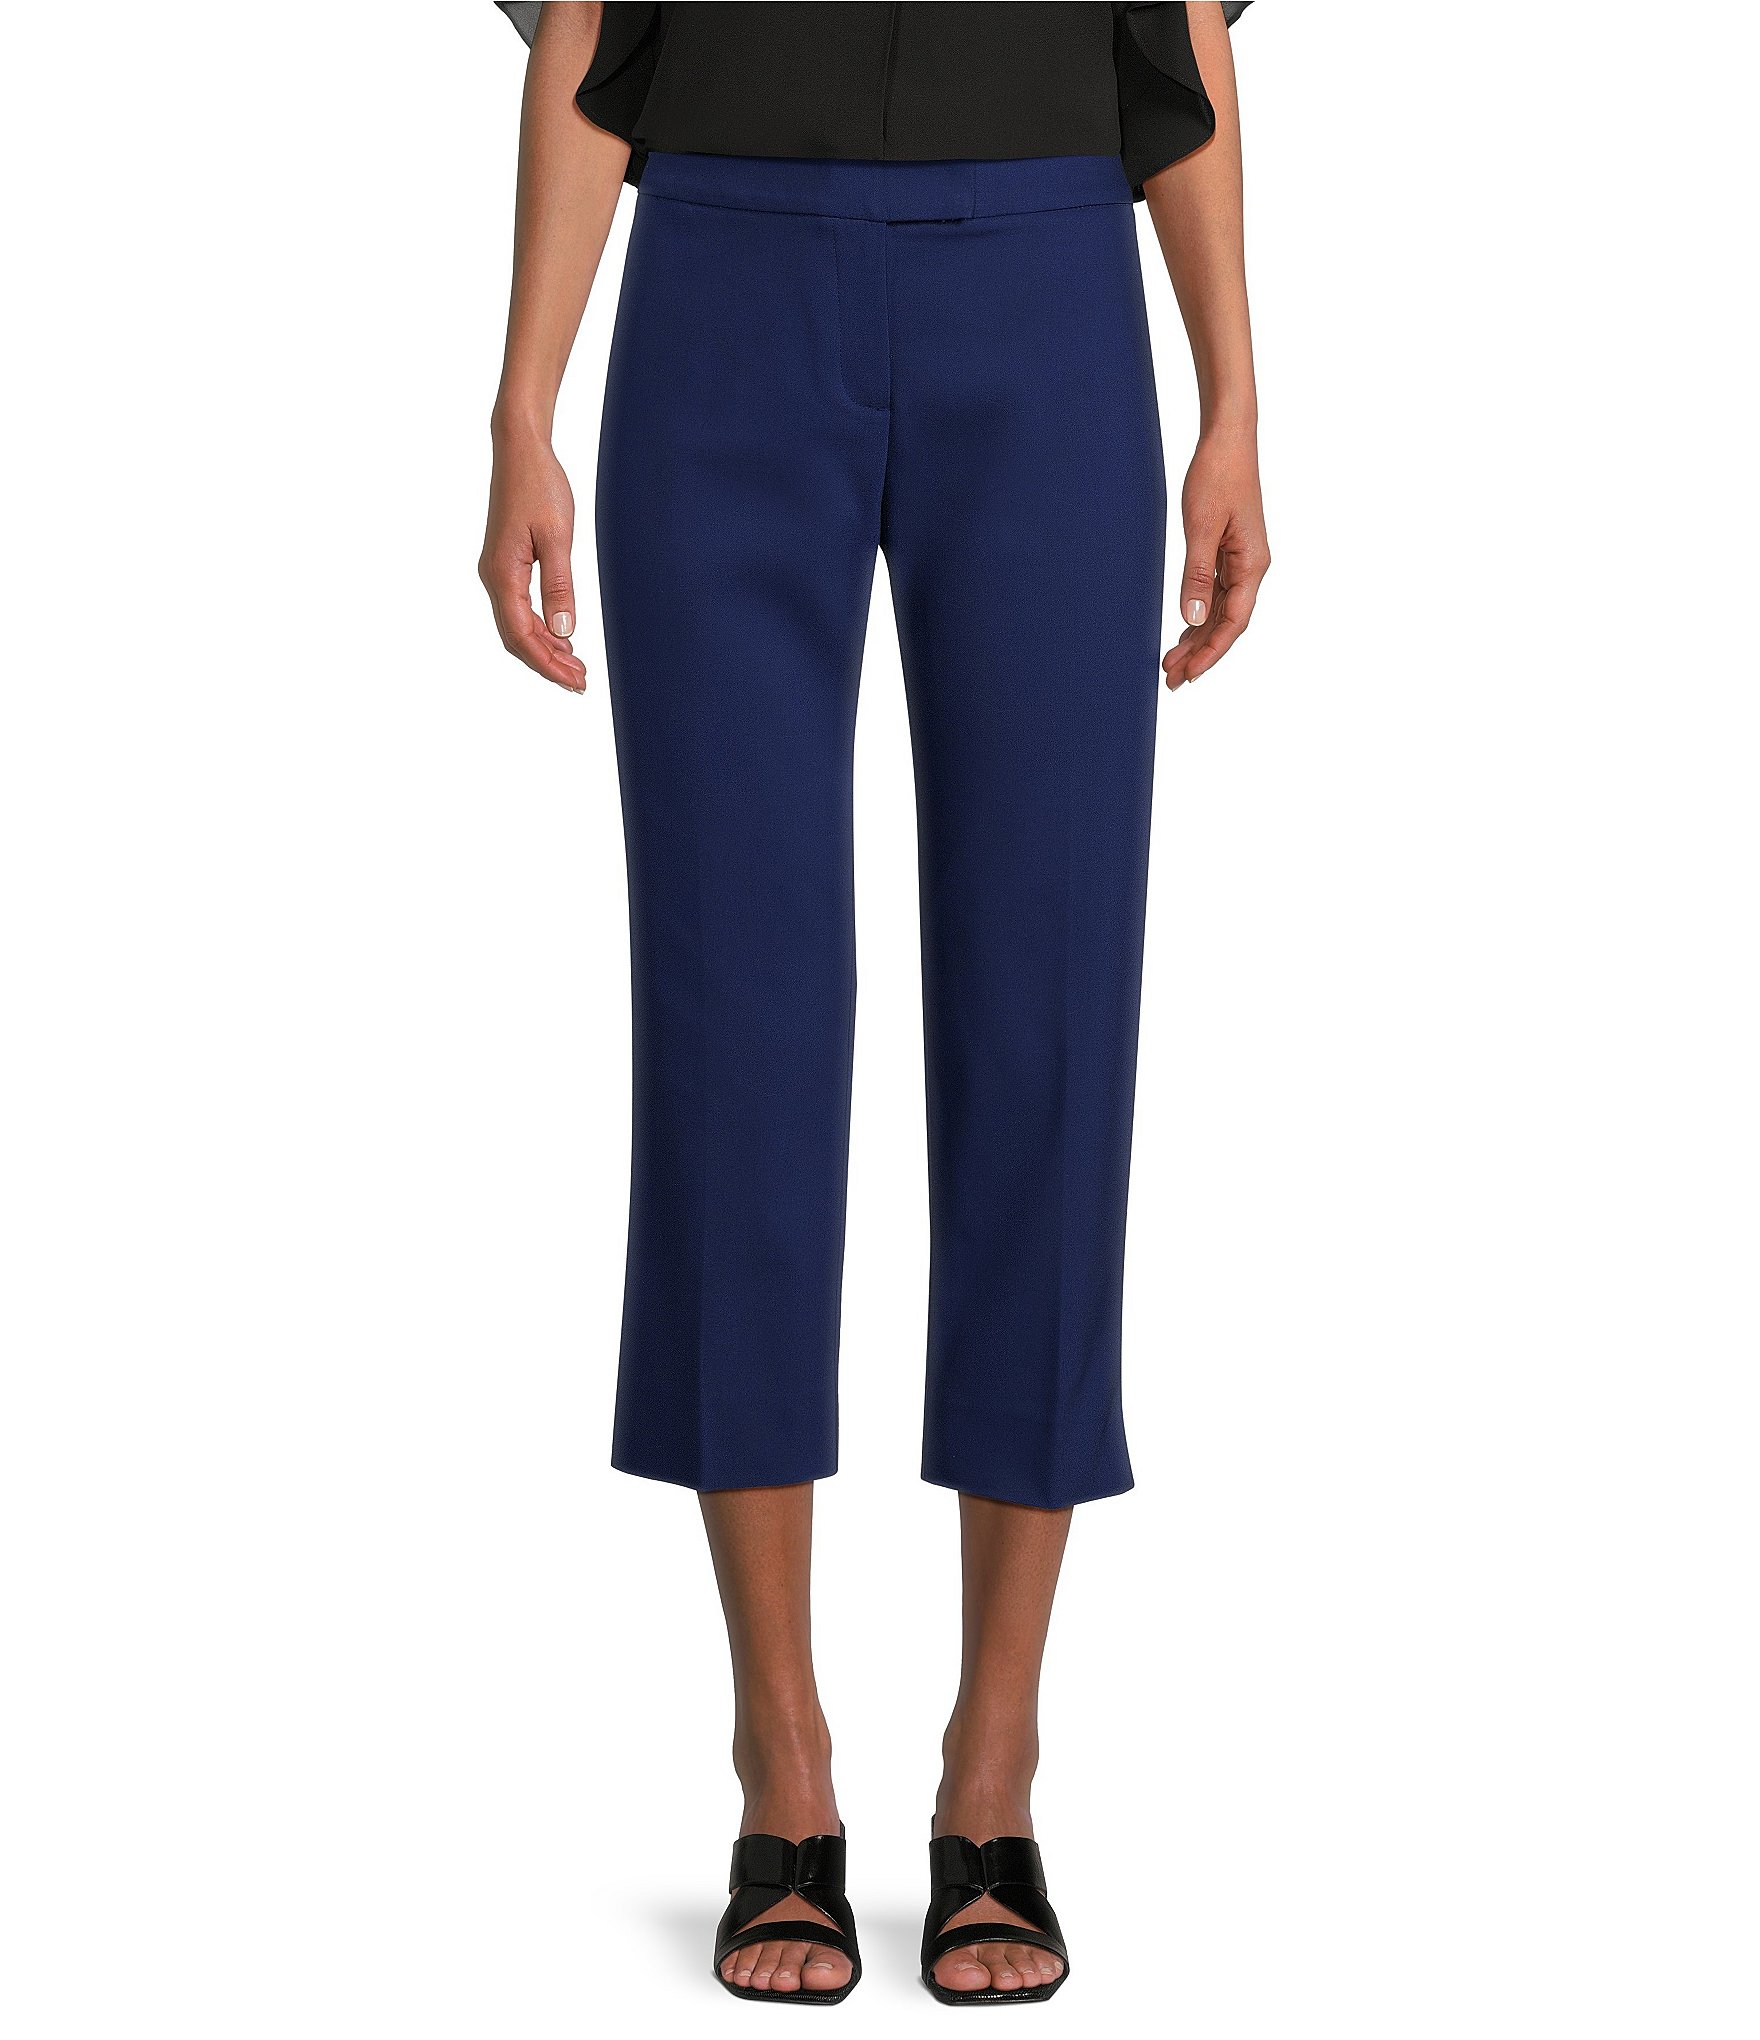 Investments the 5TH AVE fit Elite Stretch Crop Pants | Dillard's